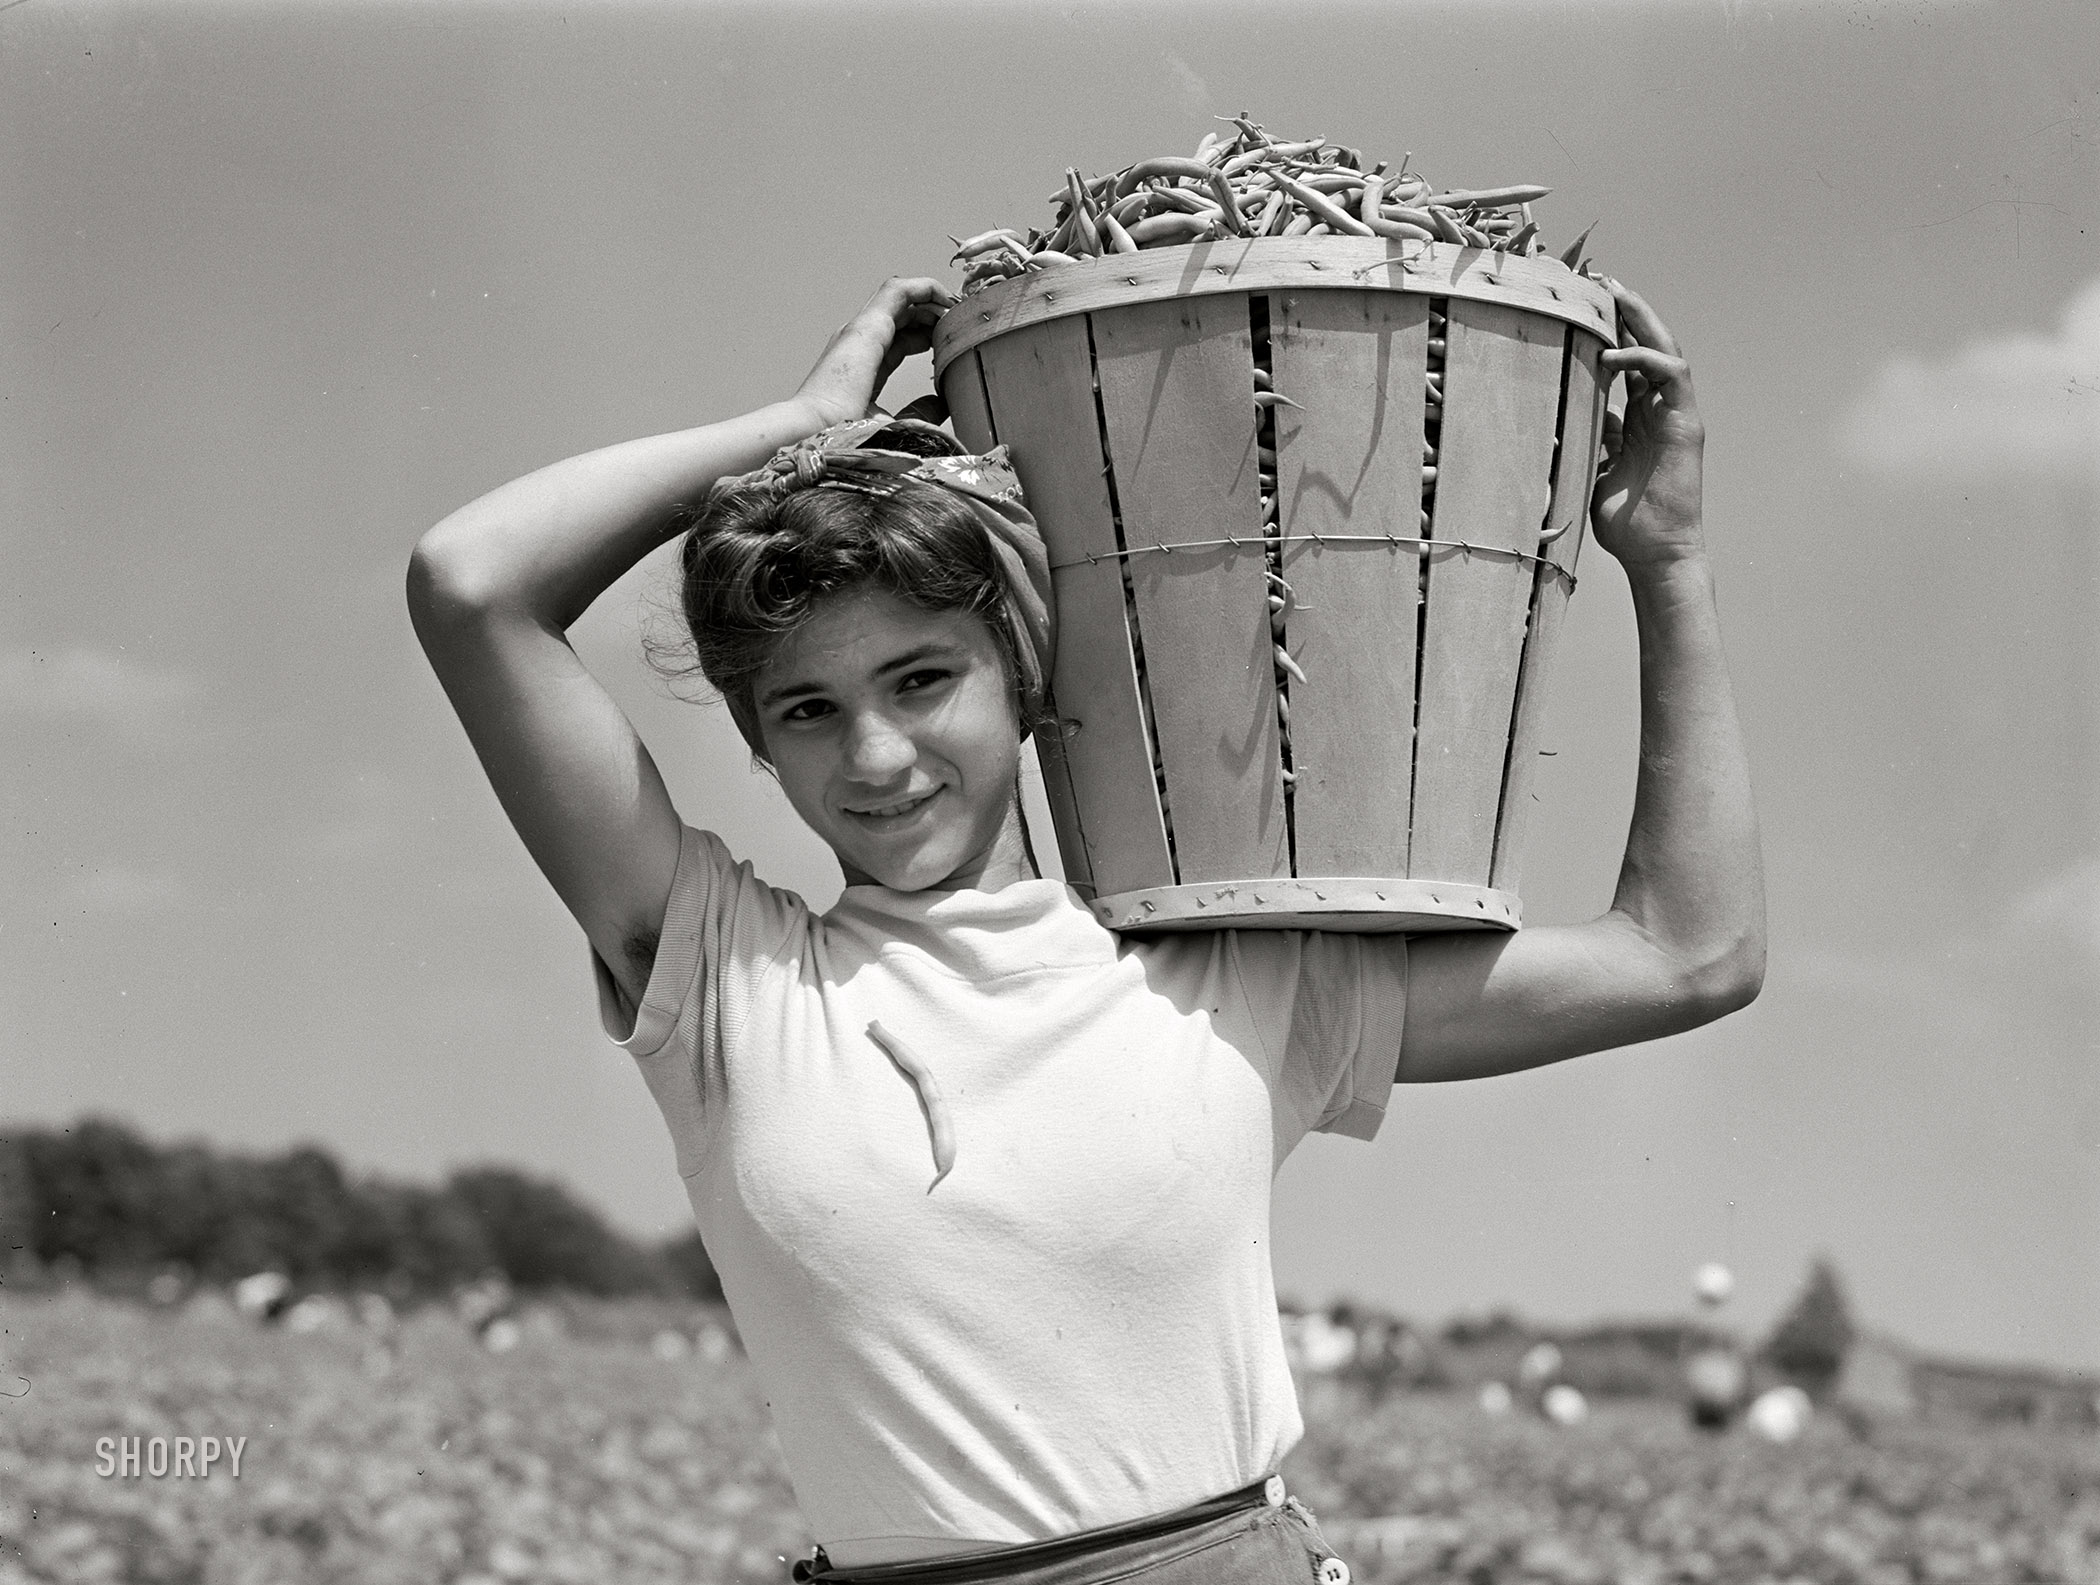 July 1941. "Italian day laborer with basket of beans she has just picked. Seabrook Farms, Bridgeton, New Jersey." Medium format acetate negative by Marion Post Wolcott for the Farm Security Administration. View full size.